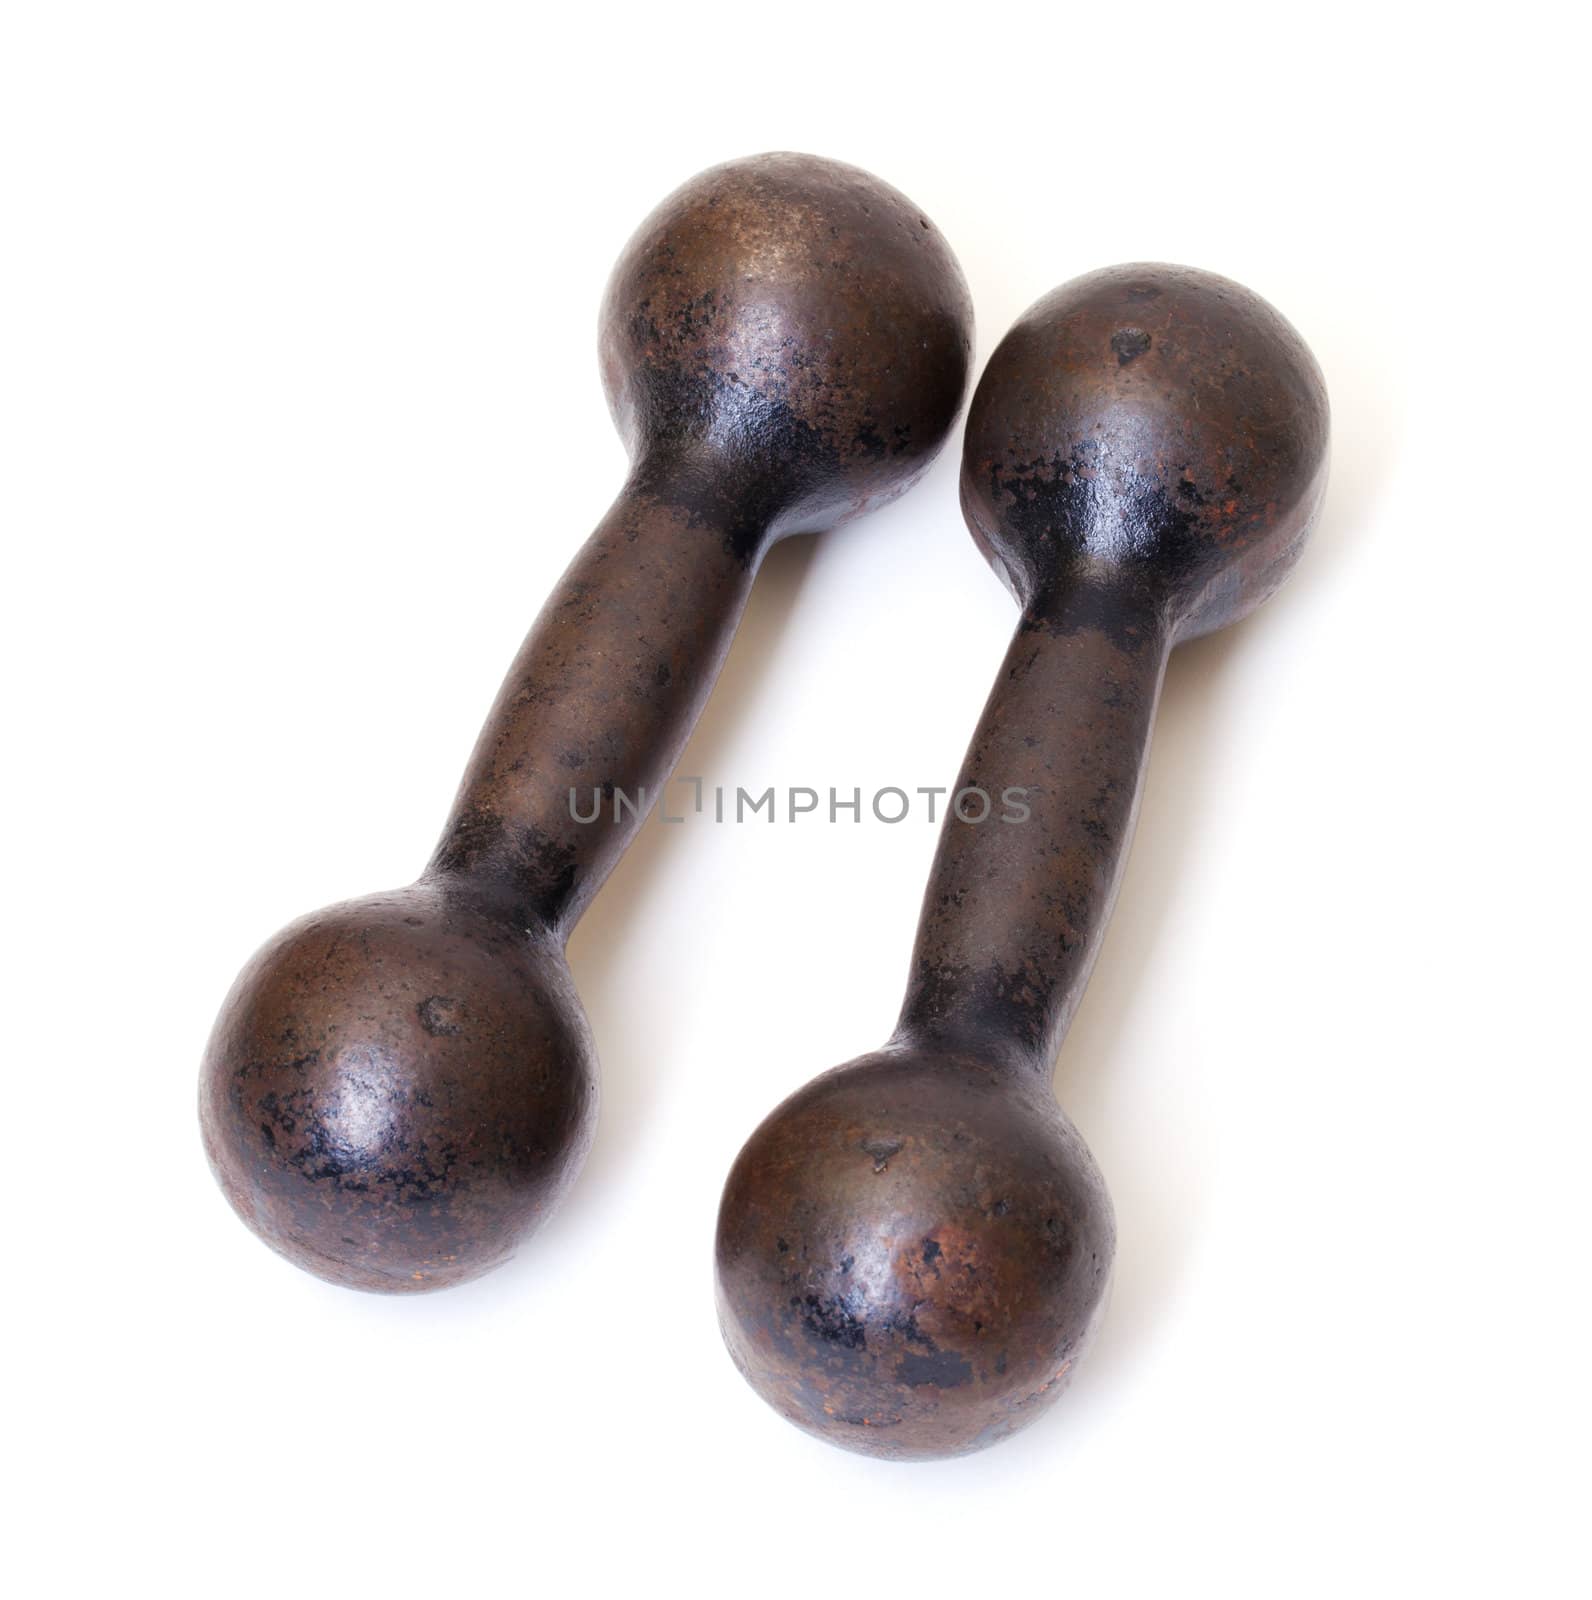 Old Rusty Dumbbells on white background